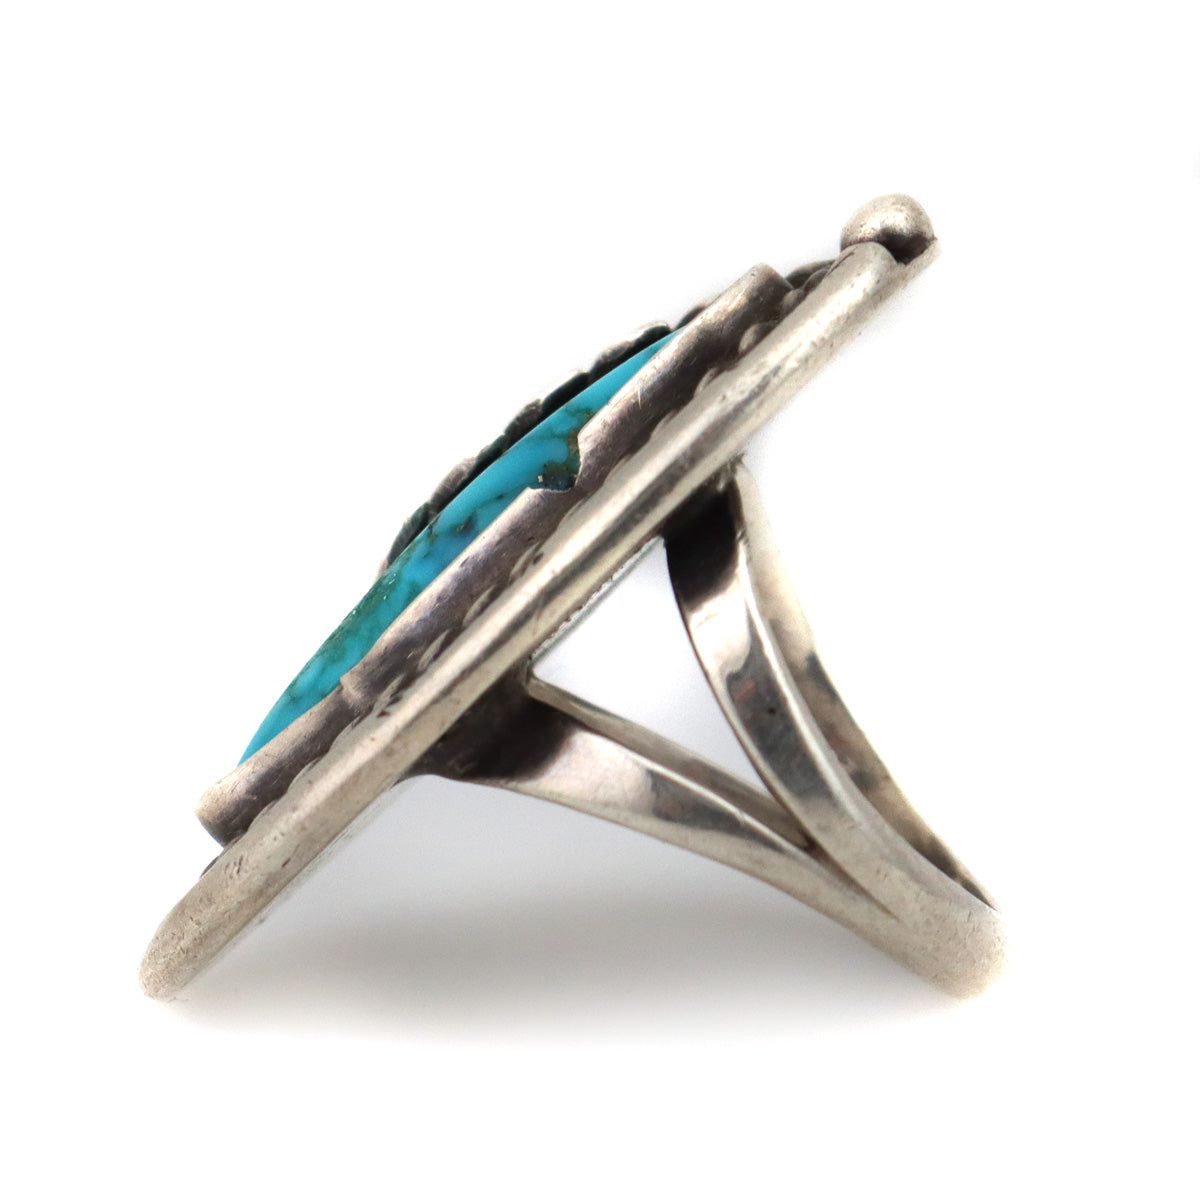 Navajo Turquoise and Silver Ring with Leaf Design c. 1950-60s, size 6 (J91427-0222-017) 3